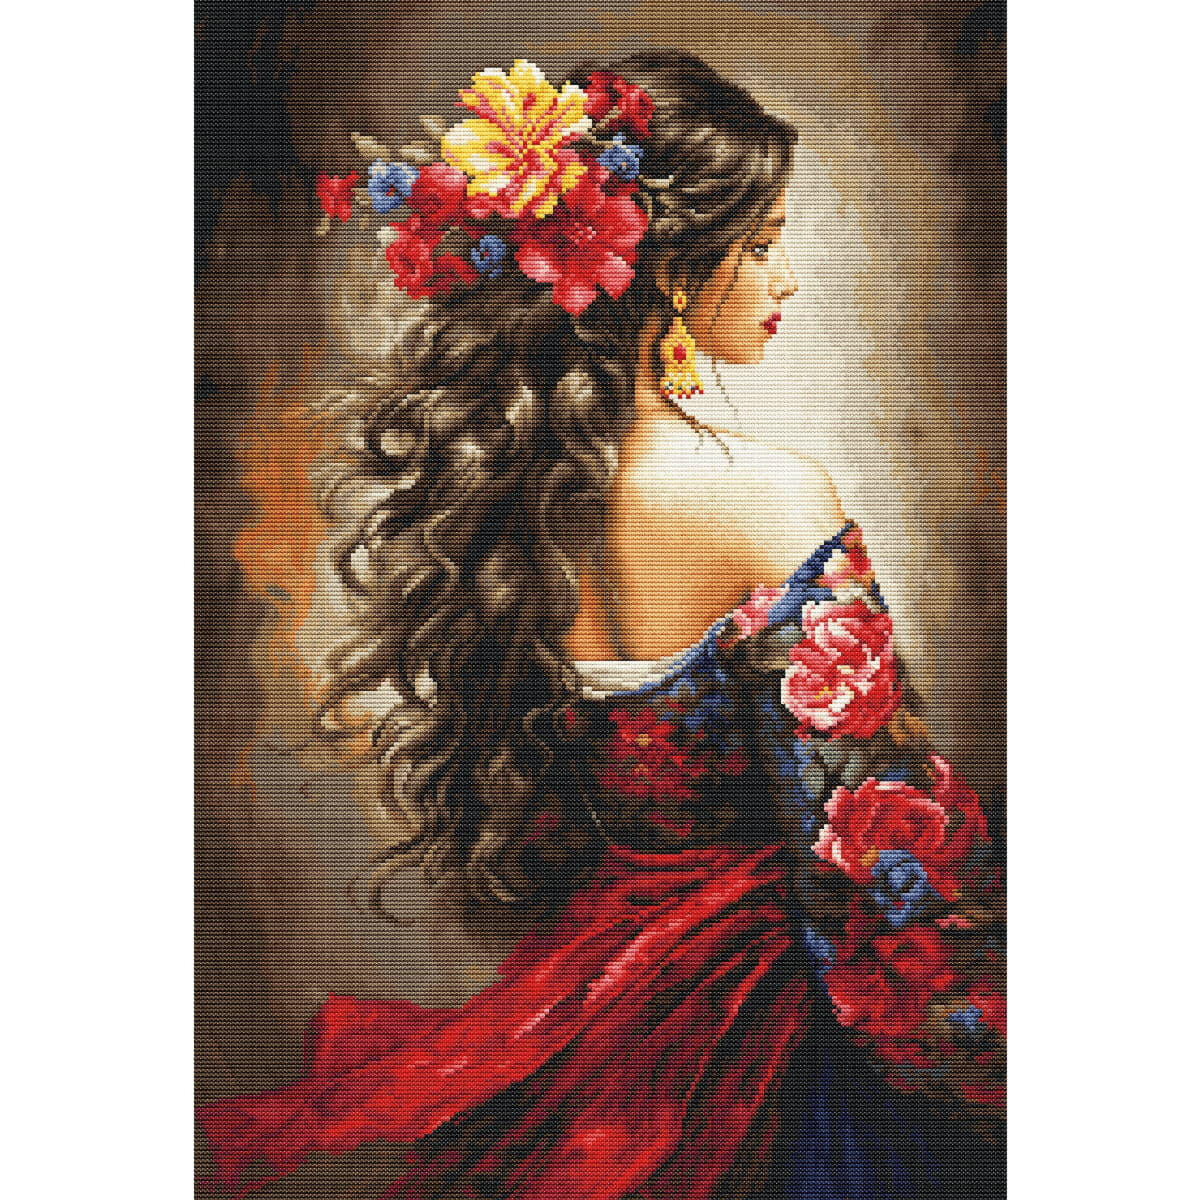 A painting of a woman with flowing, wavy dark hair...